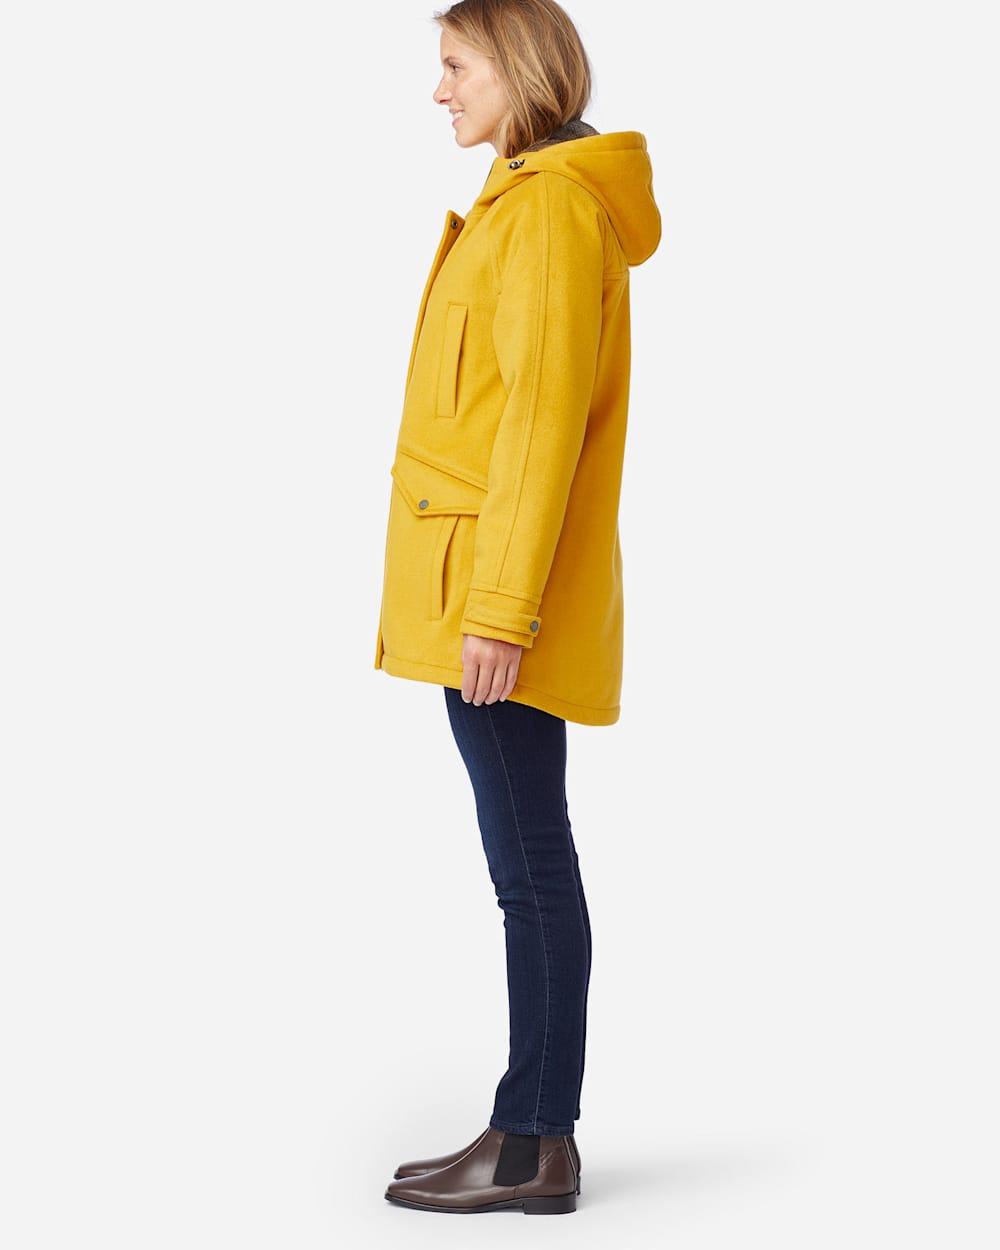 ALTERNATE VIEW OF WOMEN'S WEST HAVEN INSULATED COAT IN GOLDENROD image number 2